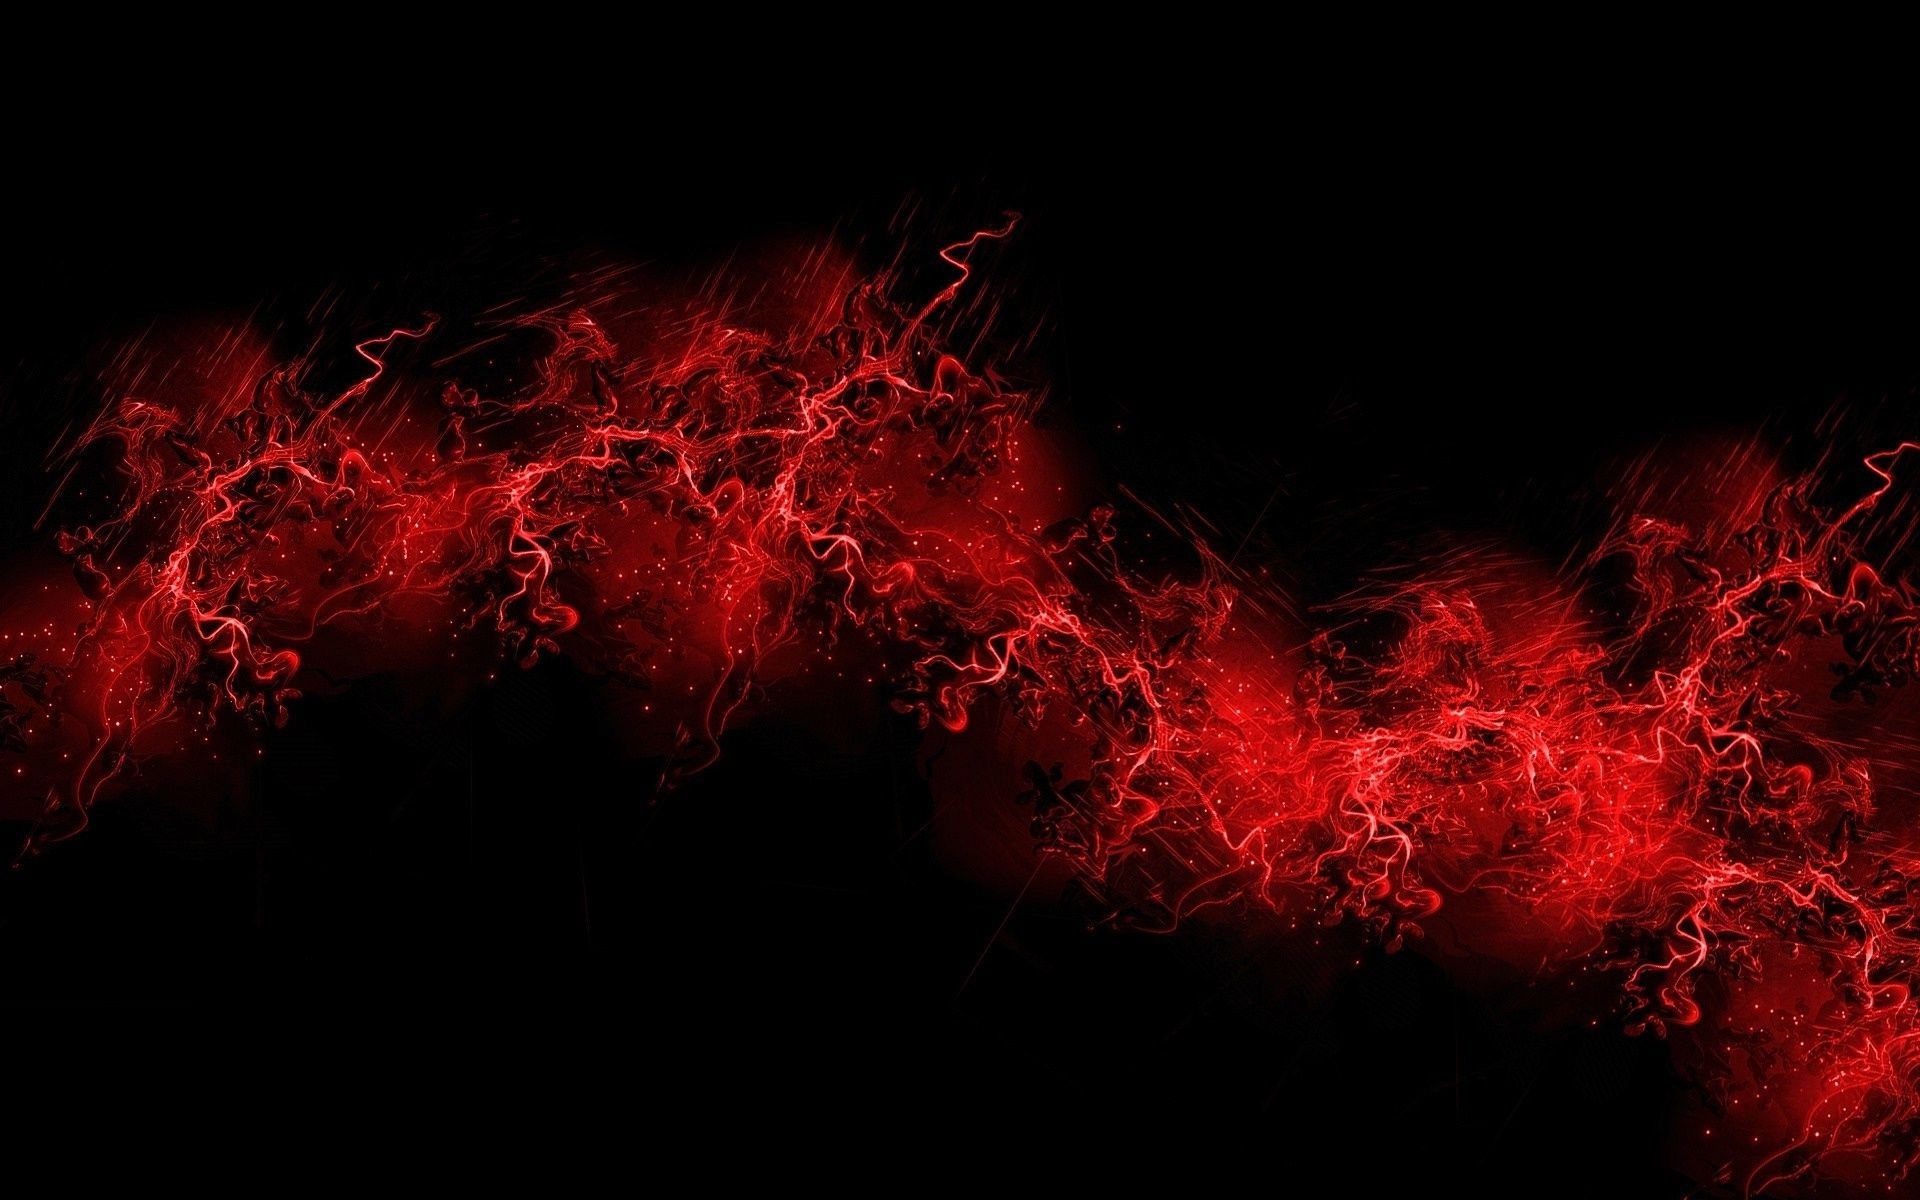 Dark Red Abstract Backgrounds Hd Widescreen 11 HD Wallpapers